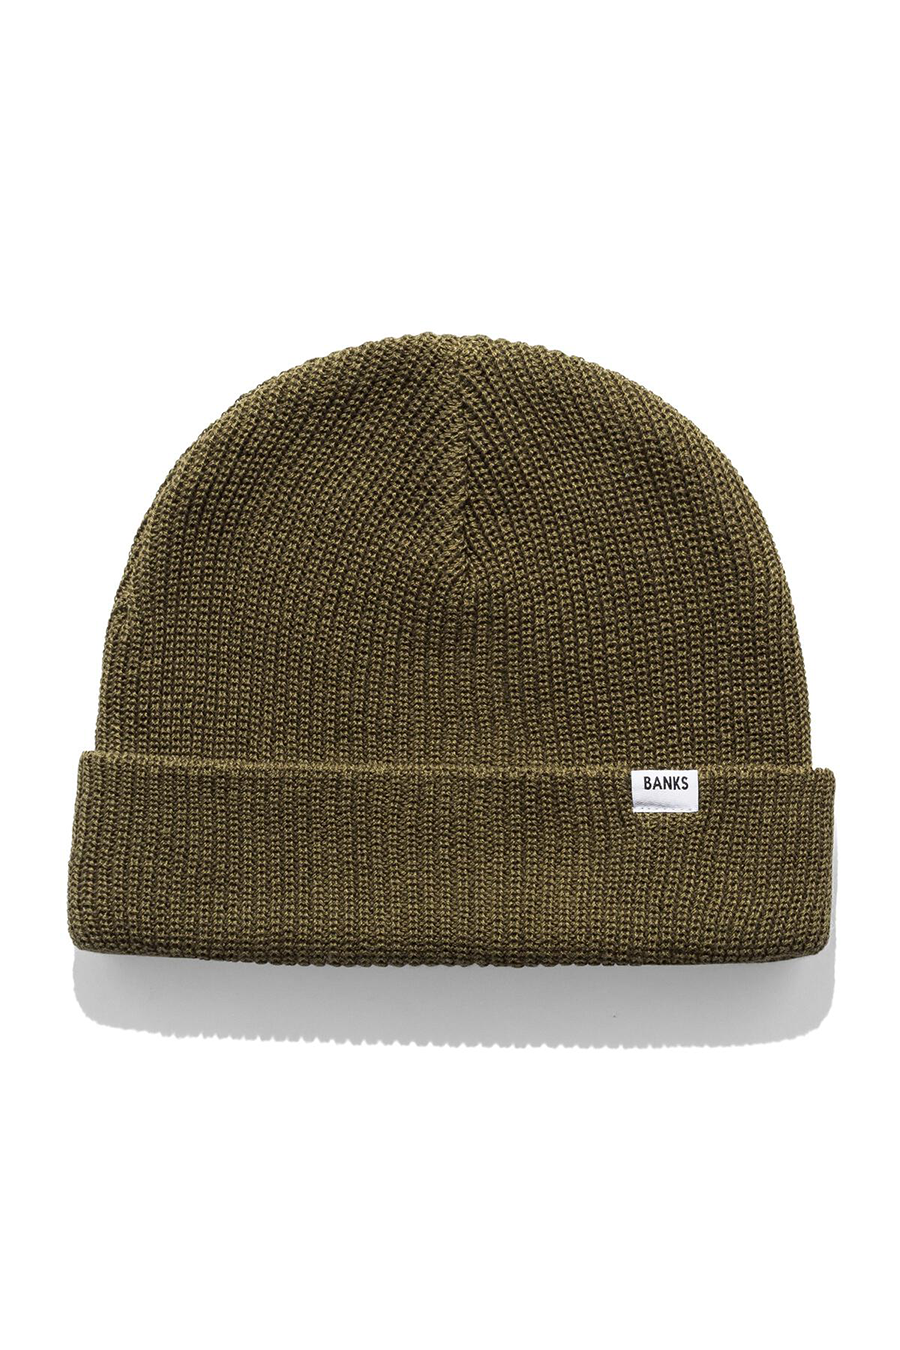 Primary Beanie | Army - Main Image Number 1 of 1